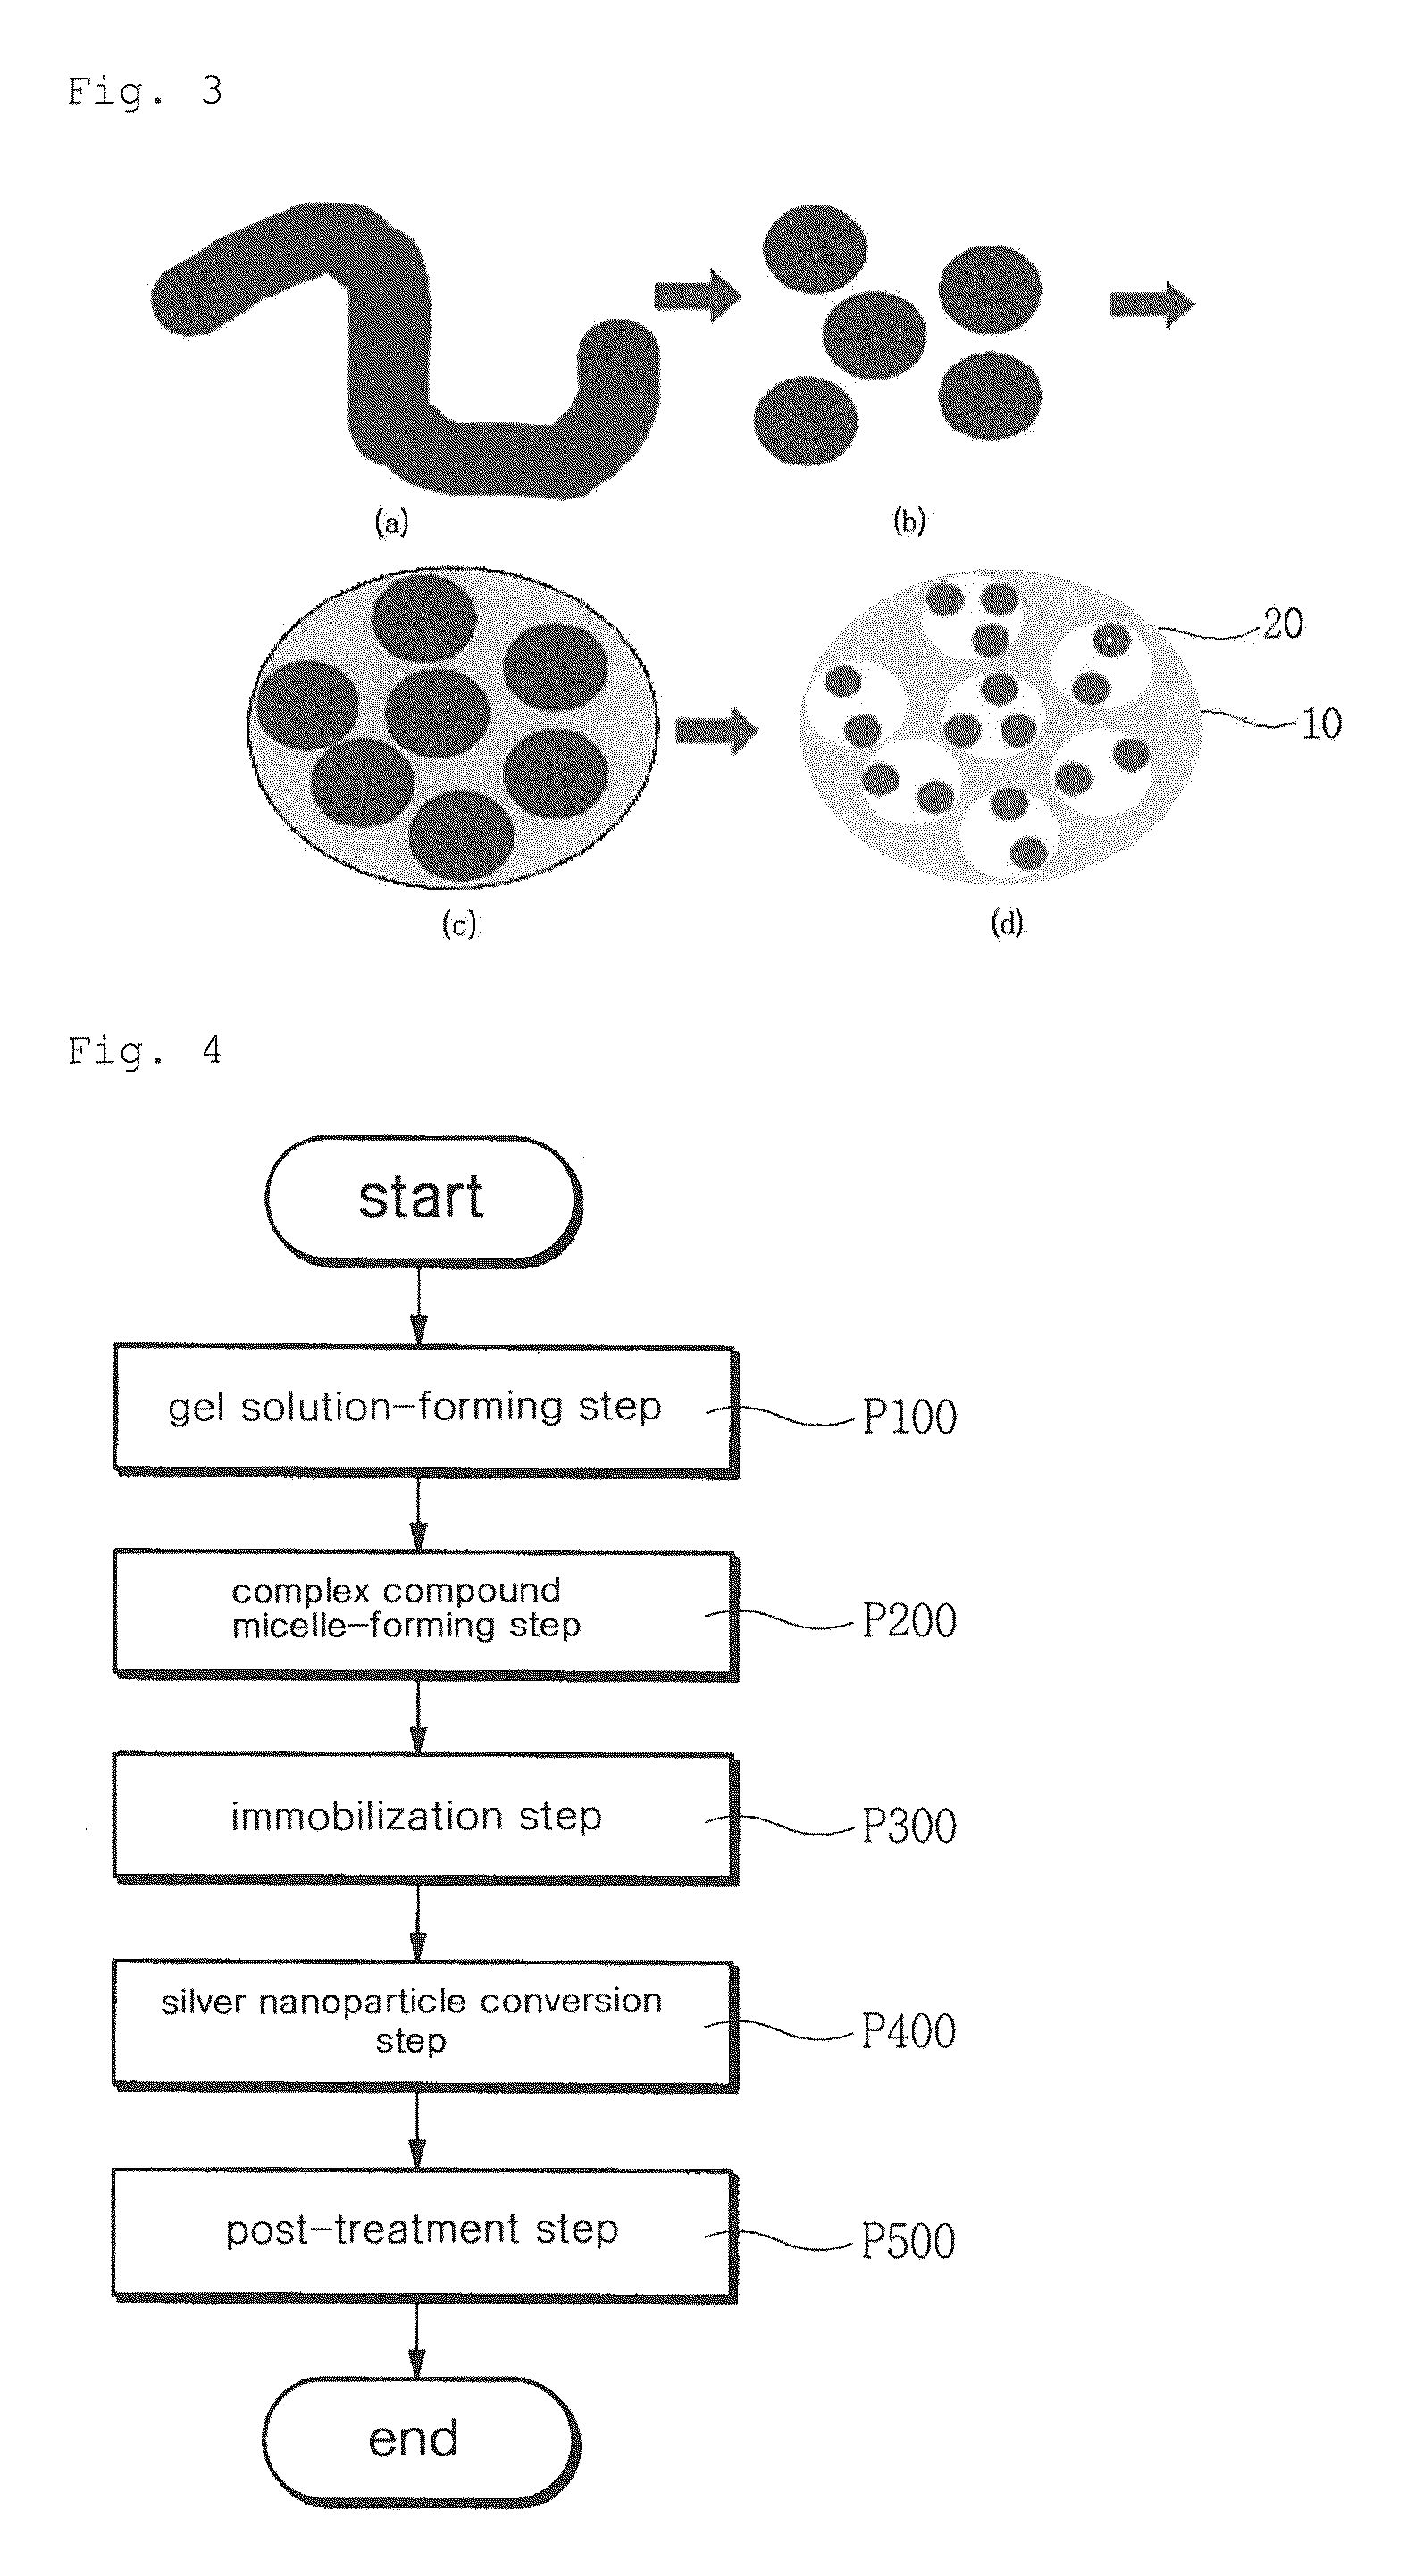 Method of manufacturing spherical mesoporous silica containing dispersed silver nanoparticles, and spherical mesoporous silica manufactured by said method